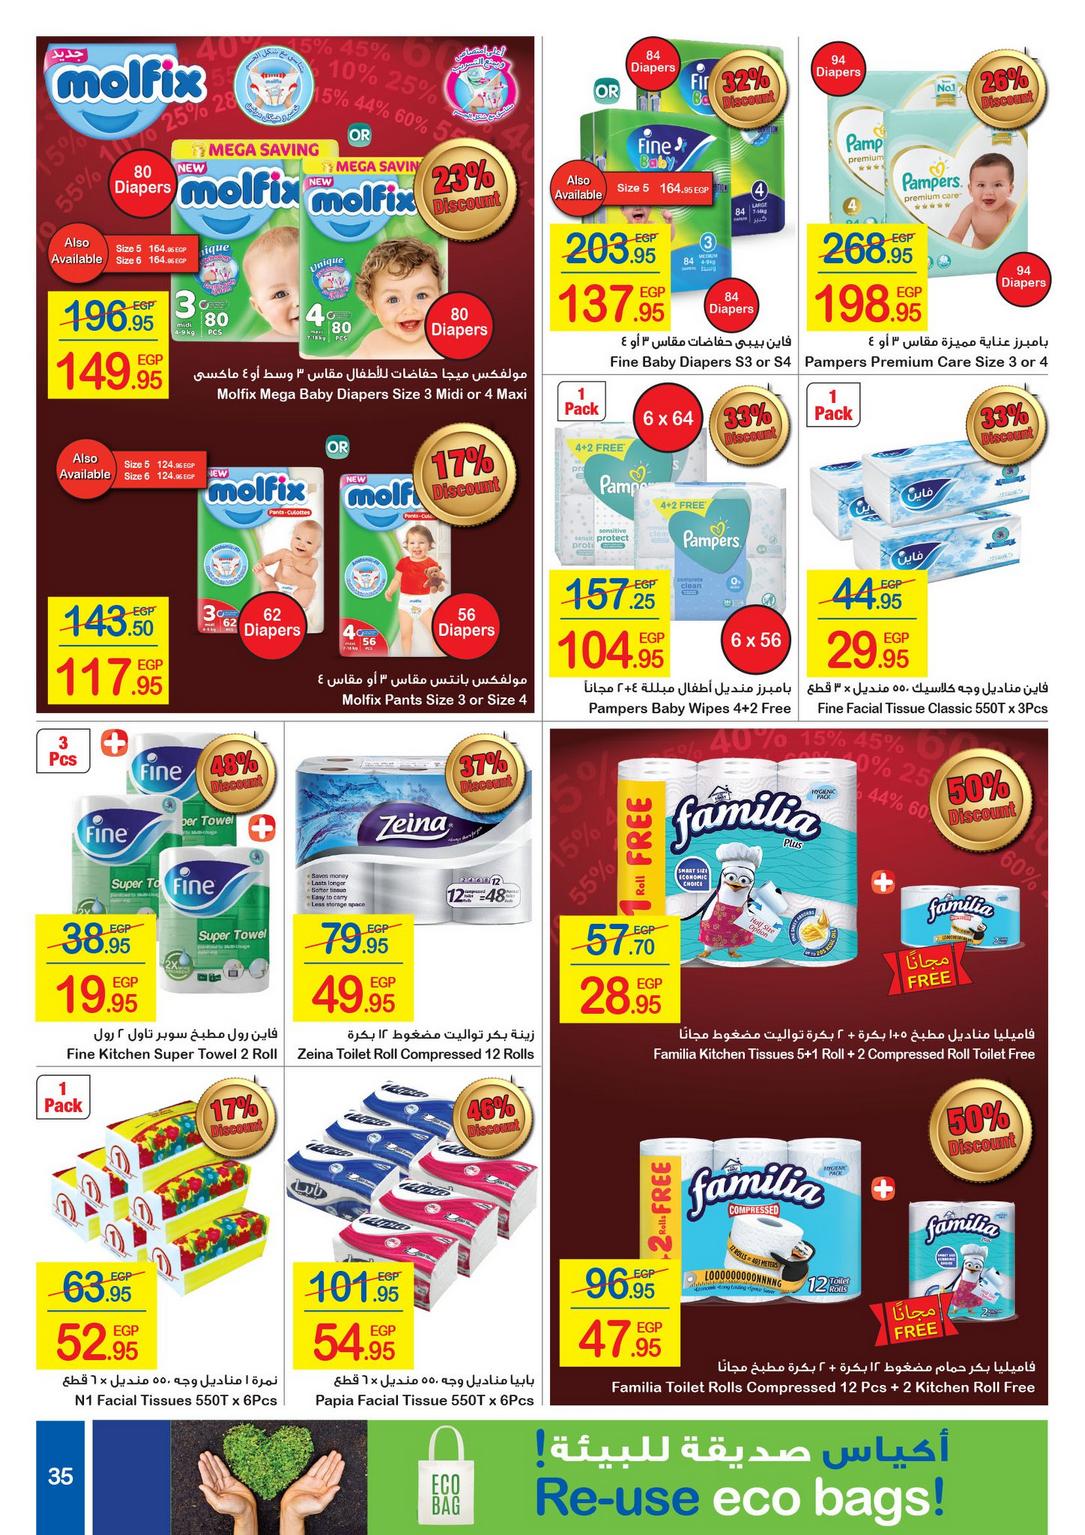 Carrefour Deals from 1/1 till 14/1 | Carrefour Egypt 36